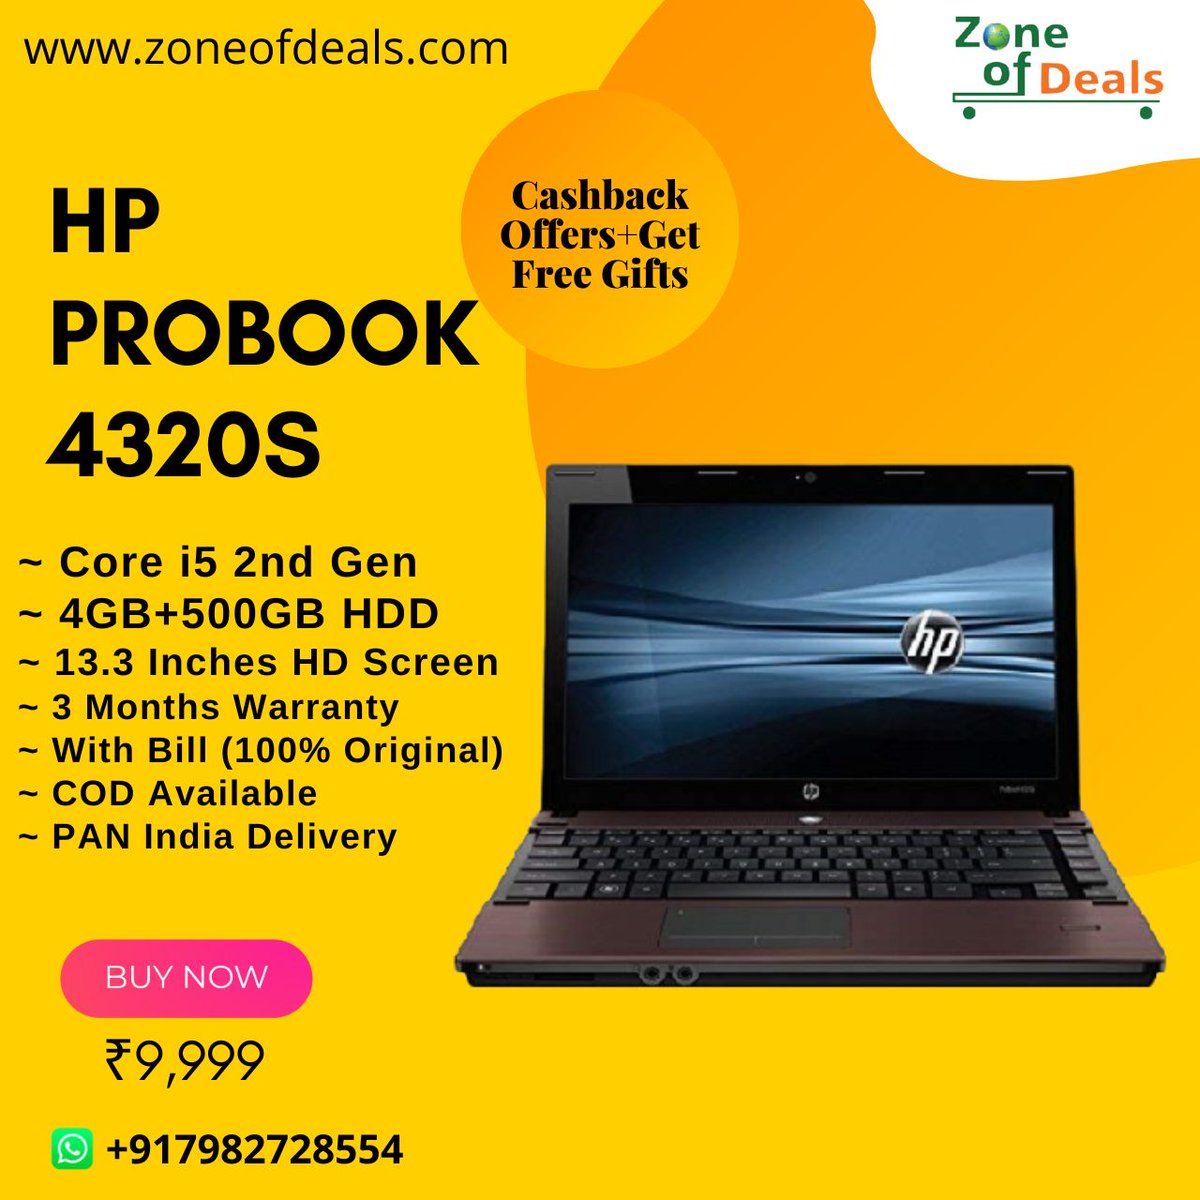 HP ProBook 4320s | Core i5 4GB + 500GB | 13.3″ Numeric Keypad | Refurbished Laptop (Excellent New Condition).
COD Also Available.
Safe Shipping Through Reputed Courier Services.
#refurbishedlaptops #laptopsforstudents #delllaptops #corei7 #workstations #laptopsunder15000 #graphic